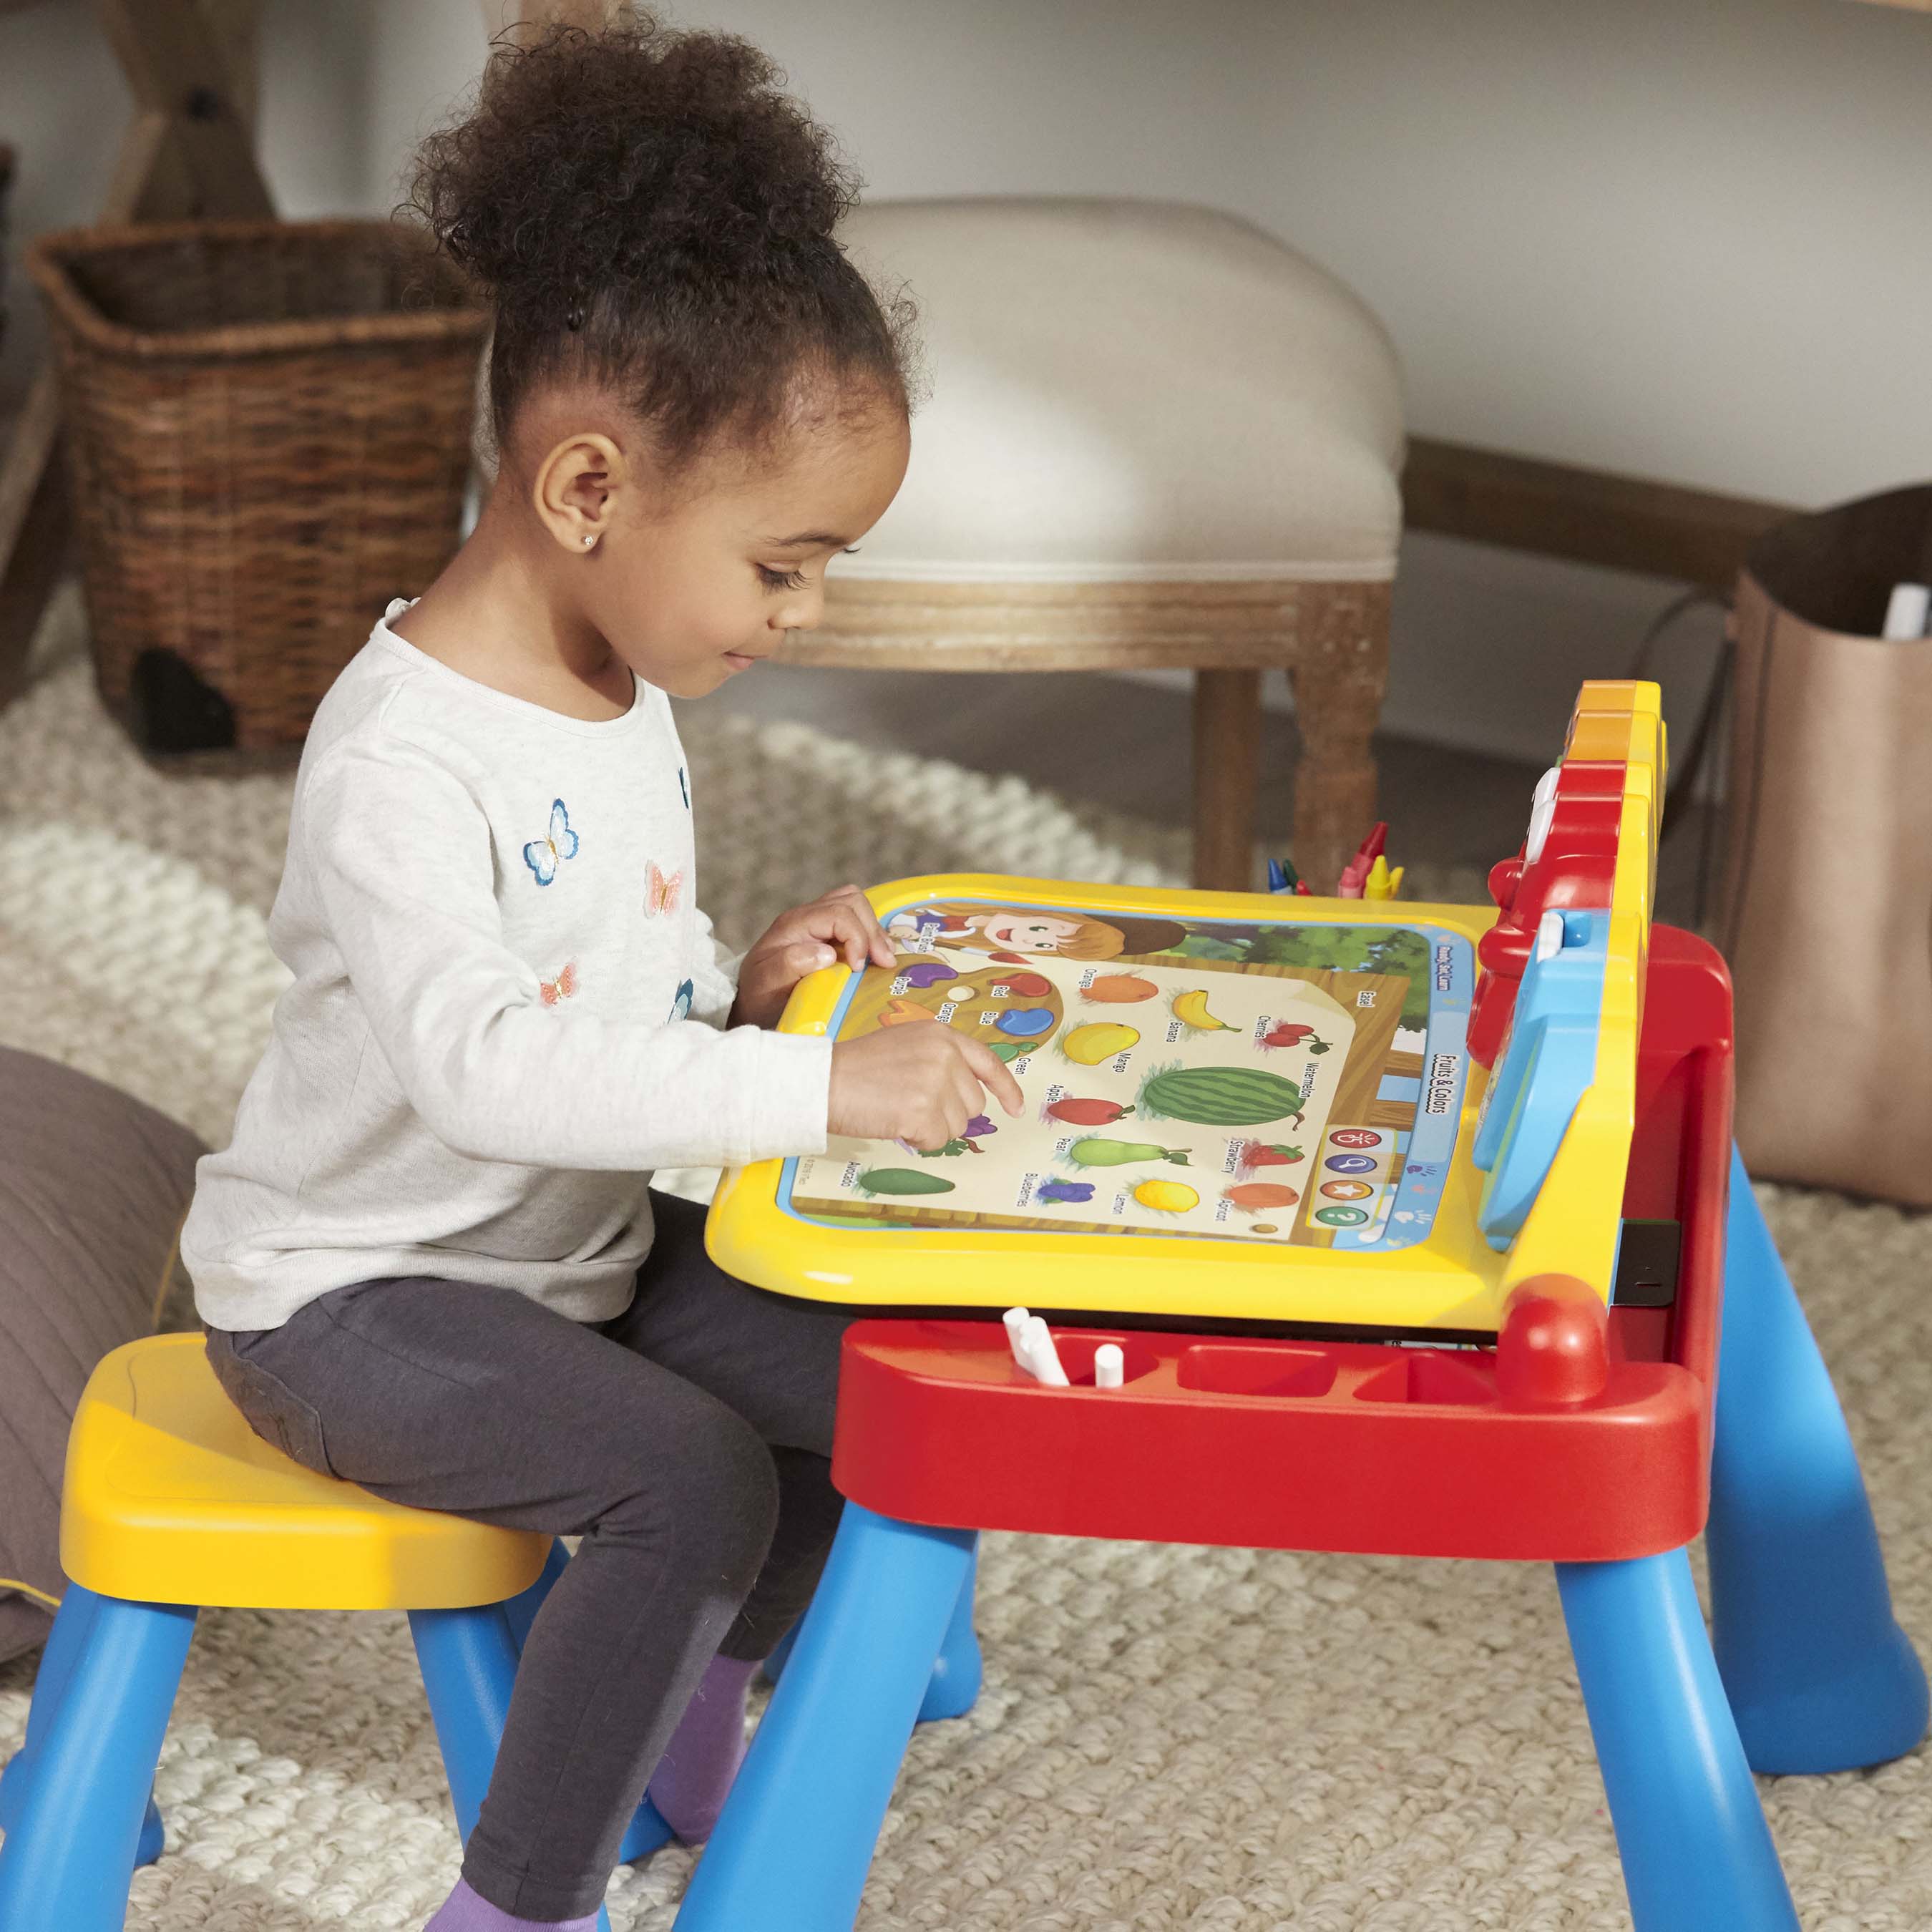 vtech learn and activity desk